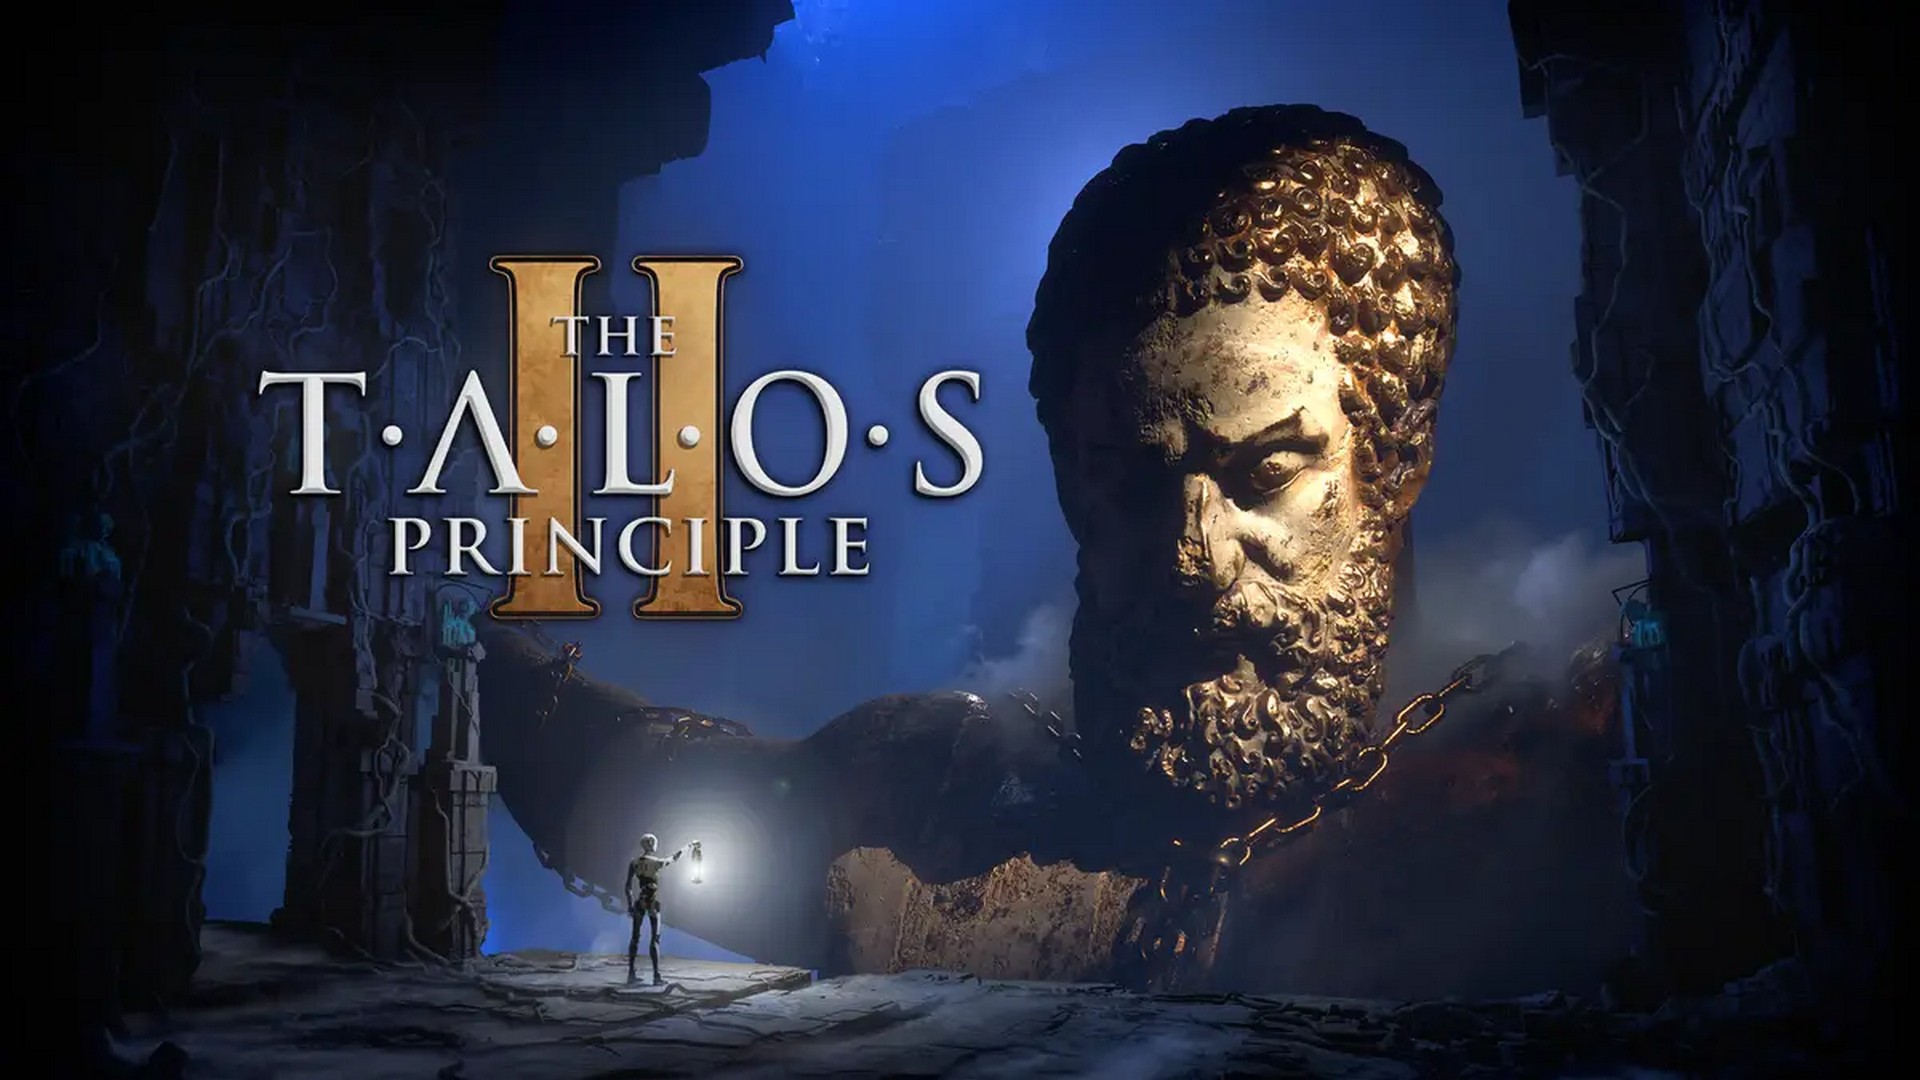 Drink In The Talos Principle 2 Launch Trailer A Day Early